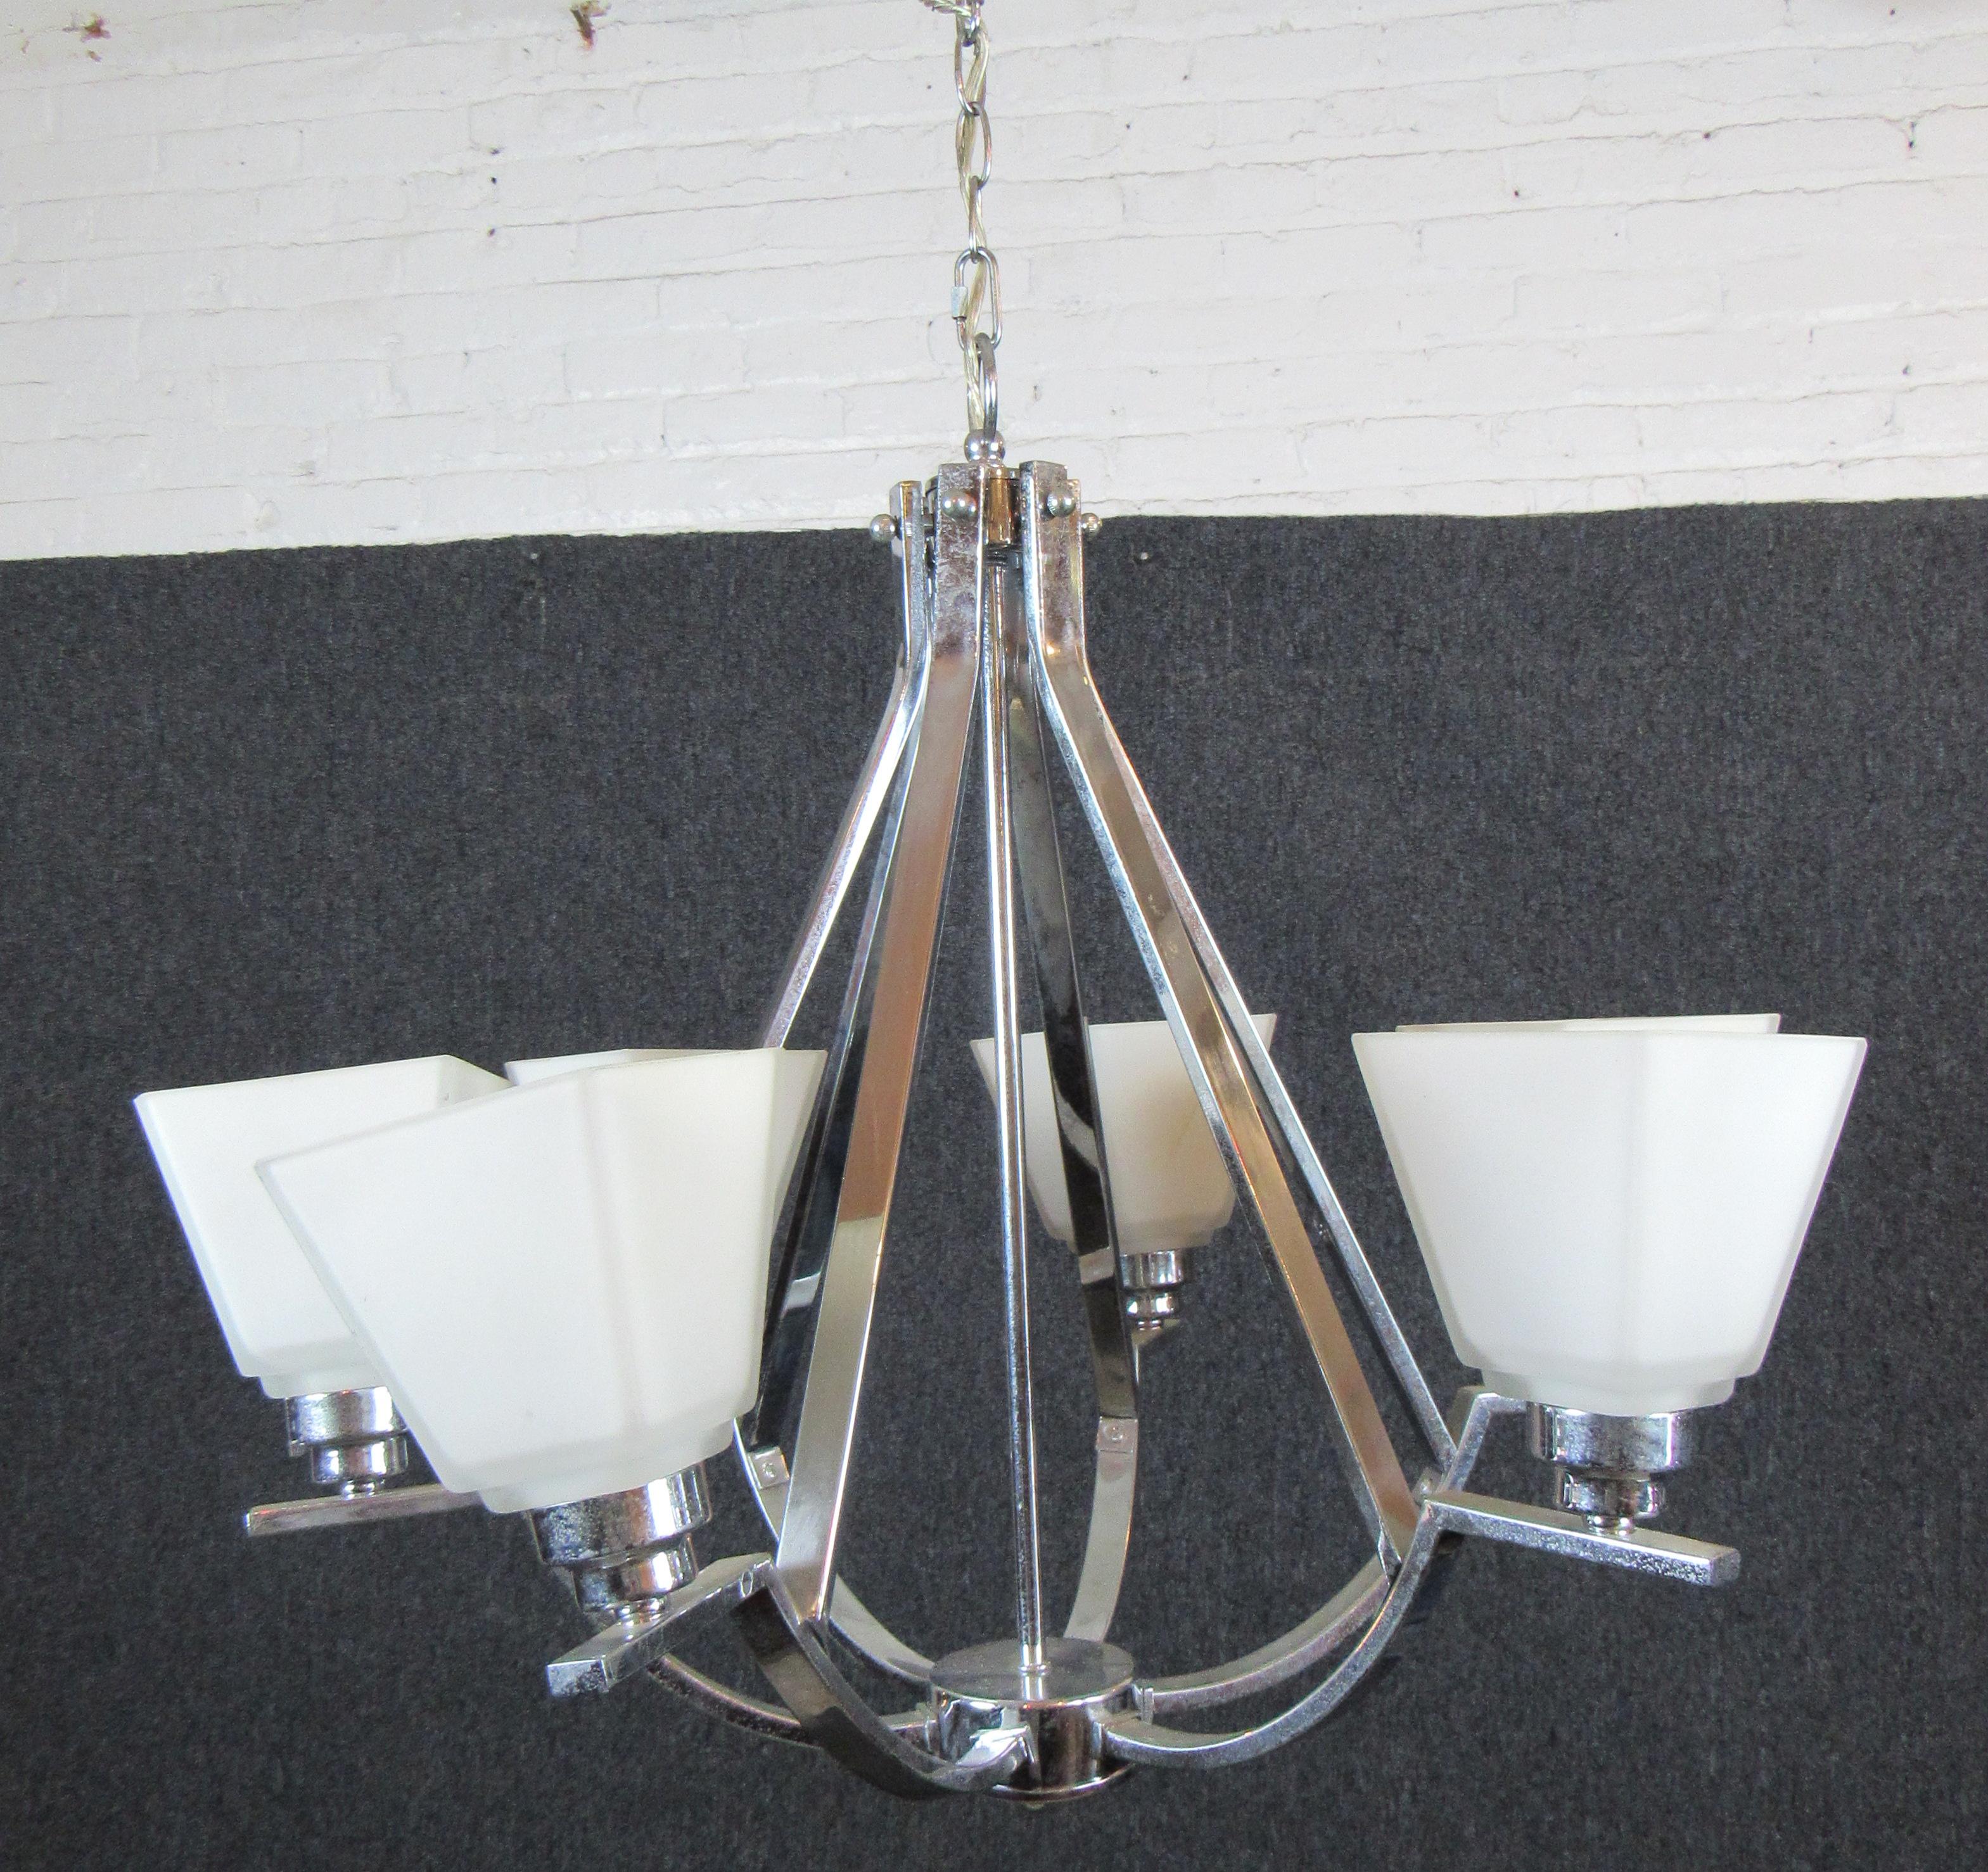 Six arm chandelier with polished chrome frame and frosted glass shades. Warm glowing light perfect for your dining room or entry way.
Please confirm location NY or NJ